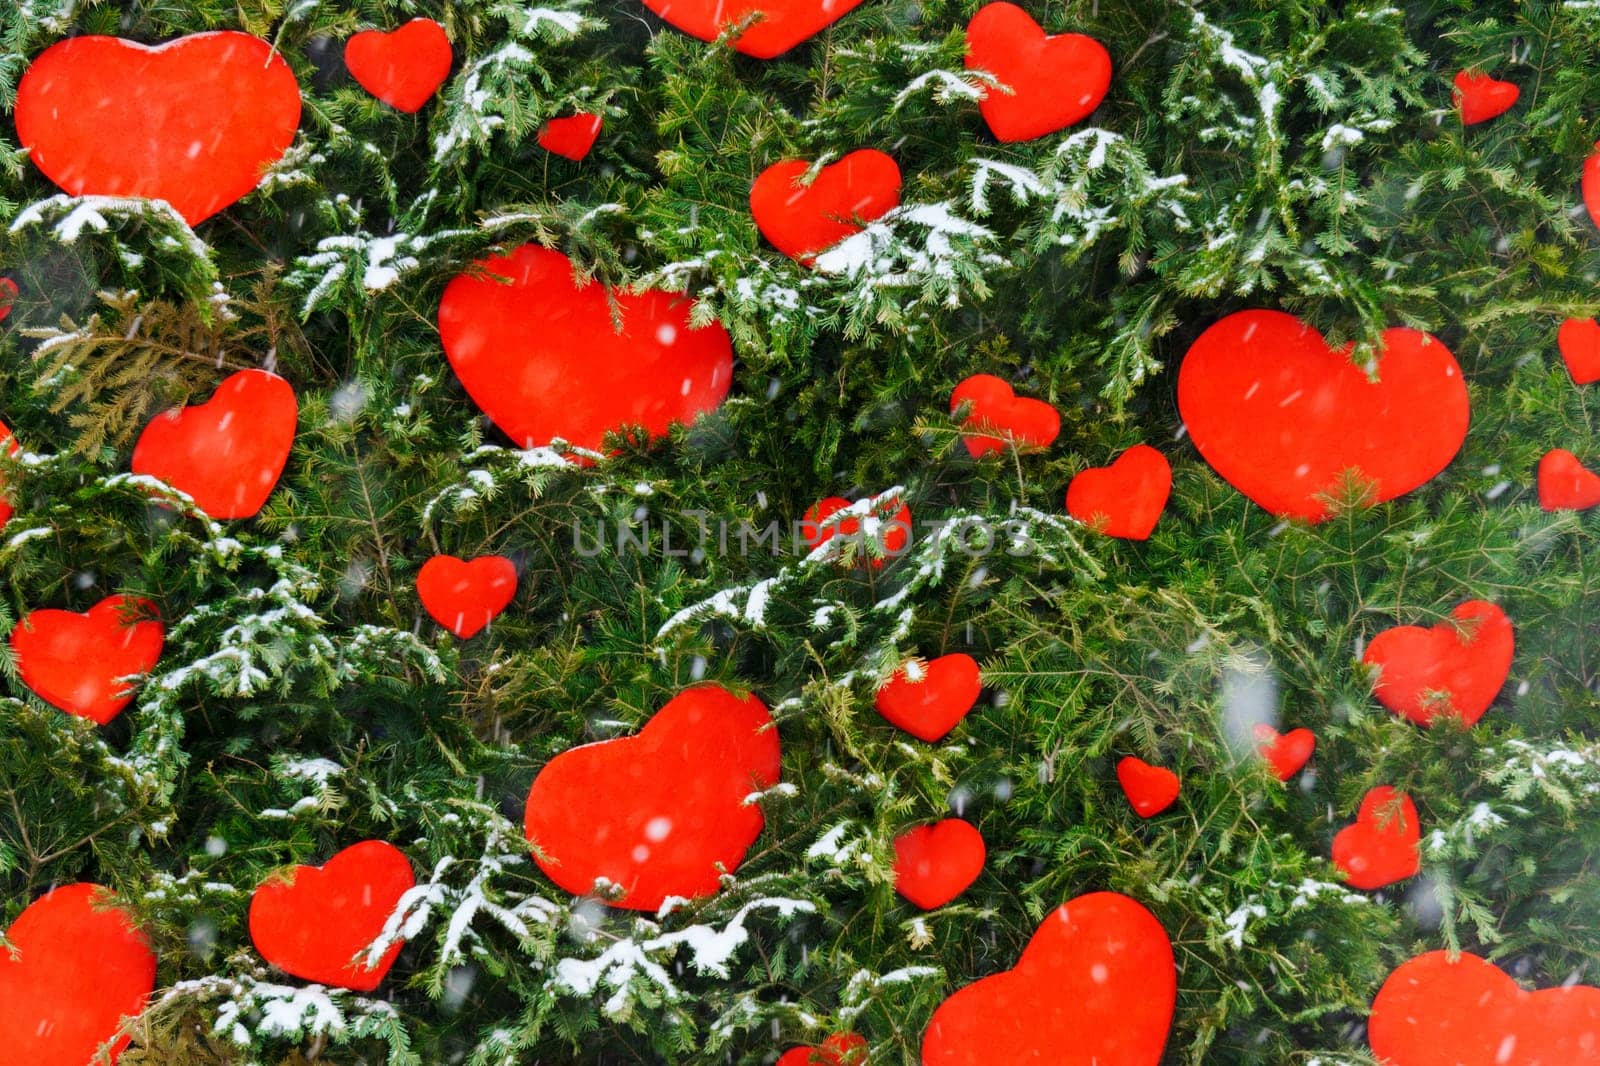 Snowy Love: A Scattered Array of Passionate Red Hearts Delights in the Winter Wonderland by darksoul72